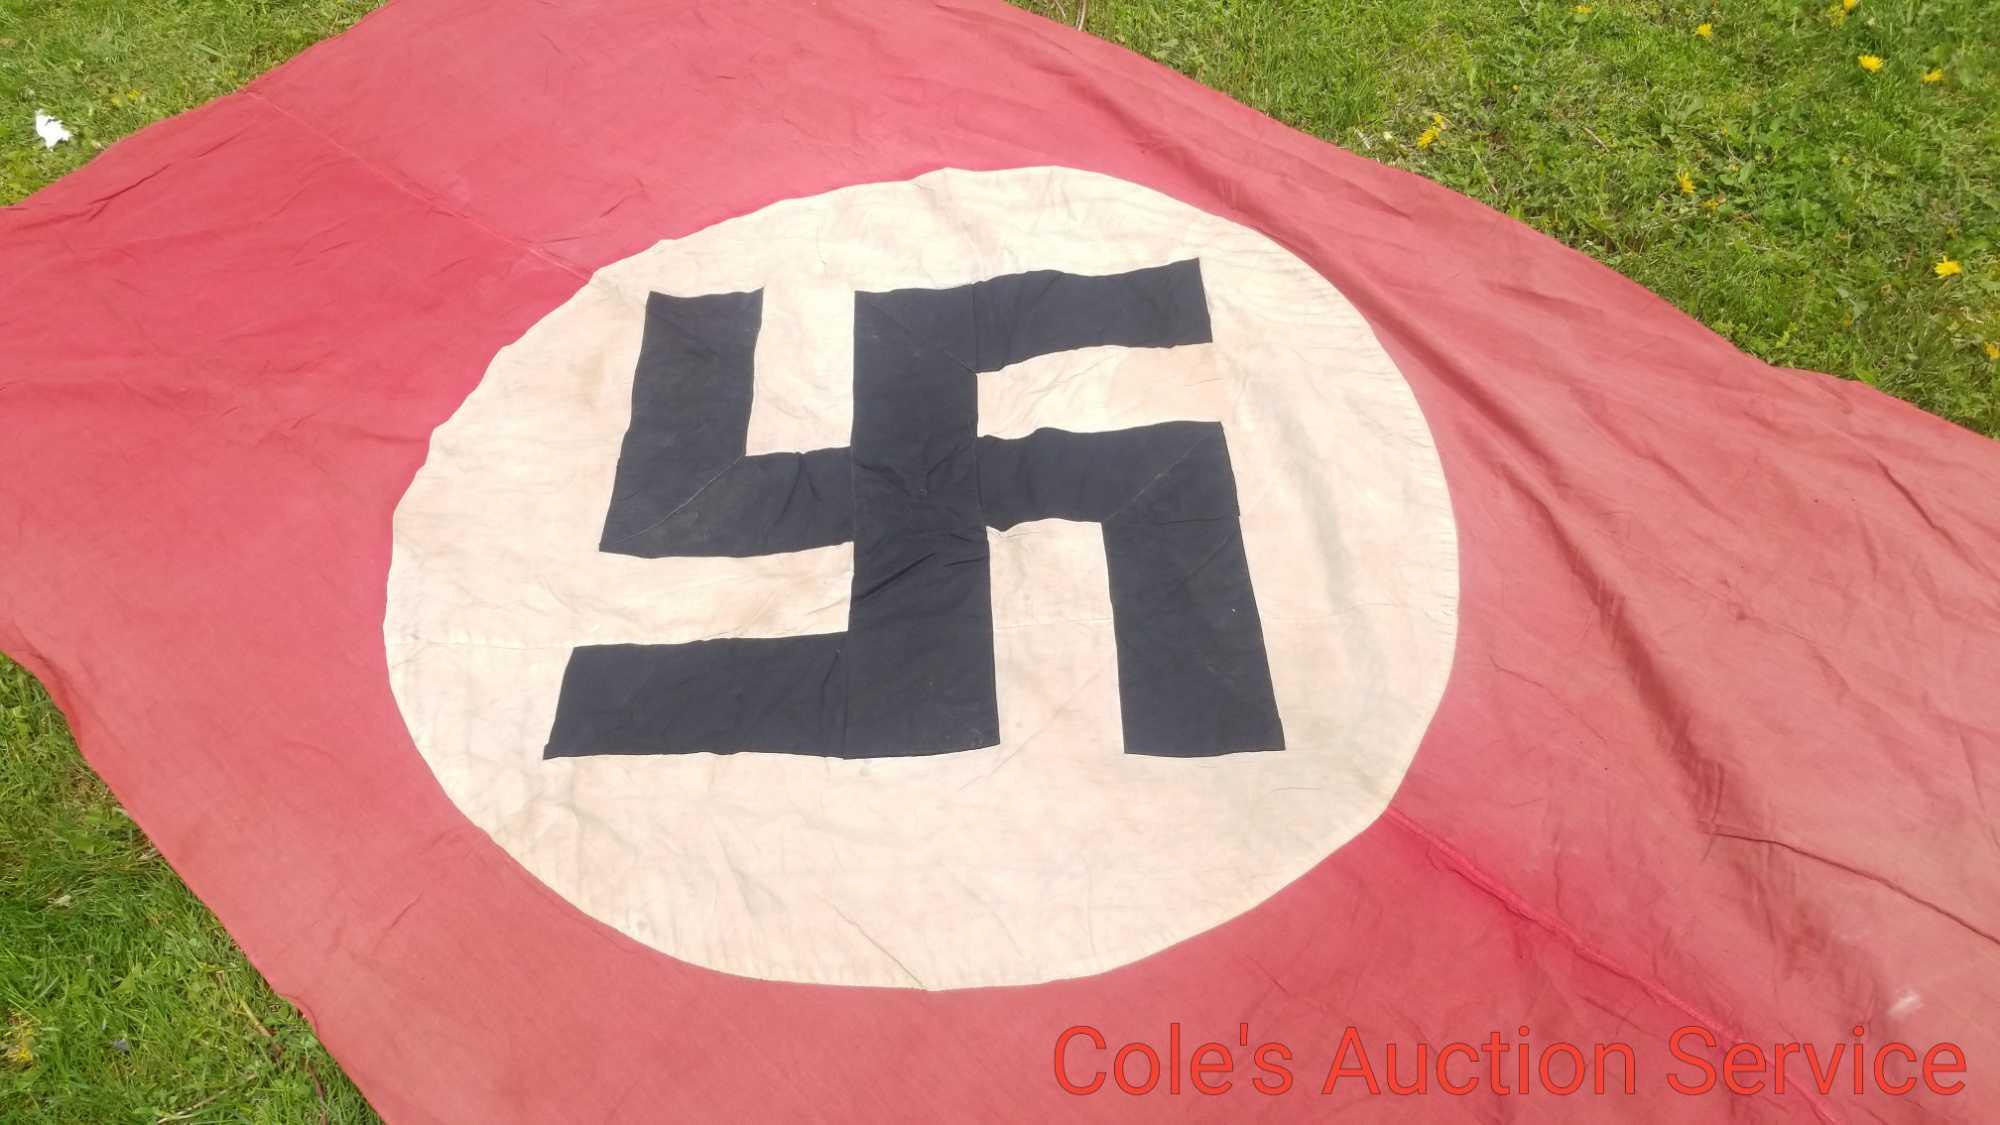 Large German Nazi flag that measures 4.8 x 8.8.Note, we do not condone the atrocities committed by